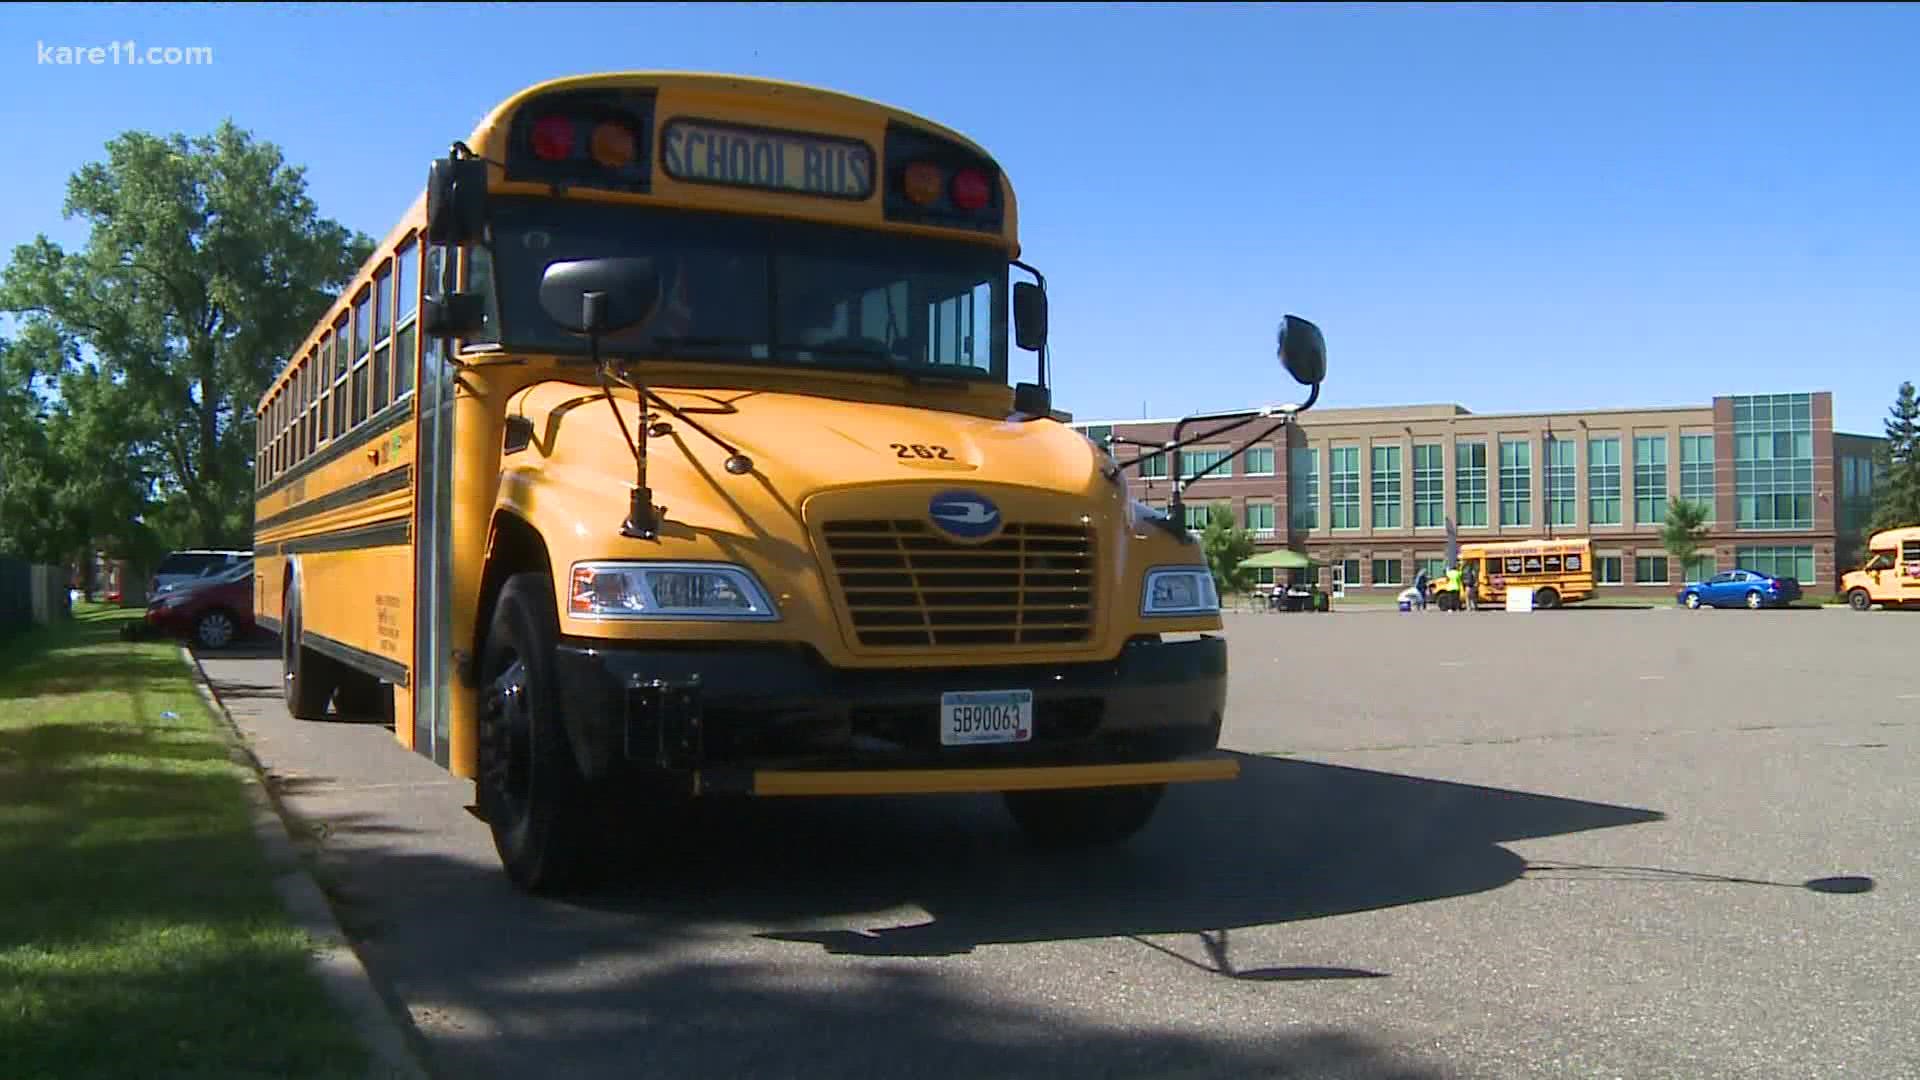 Minneapolis and St. Paul are both reporting significant school bus driver shortages heading into the year, which has major implications for parents.